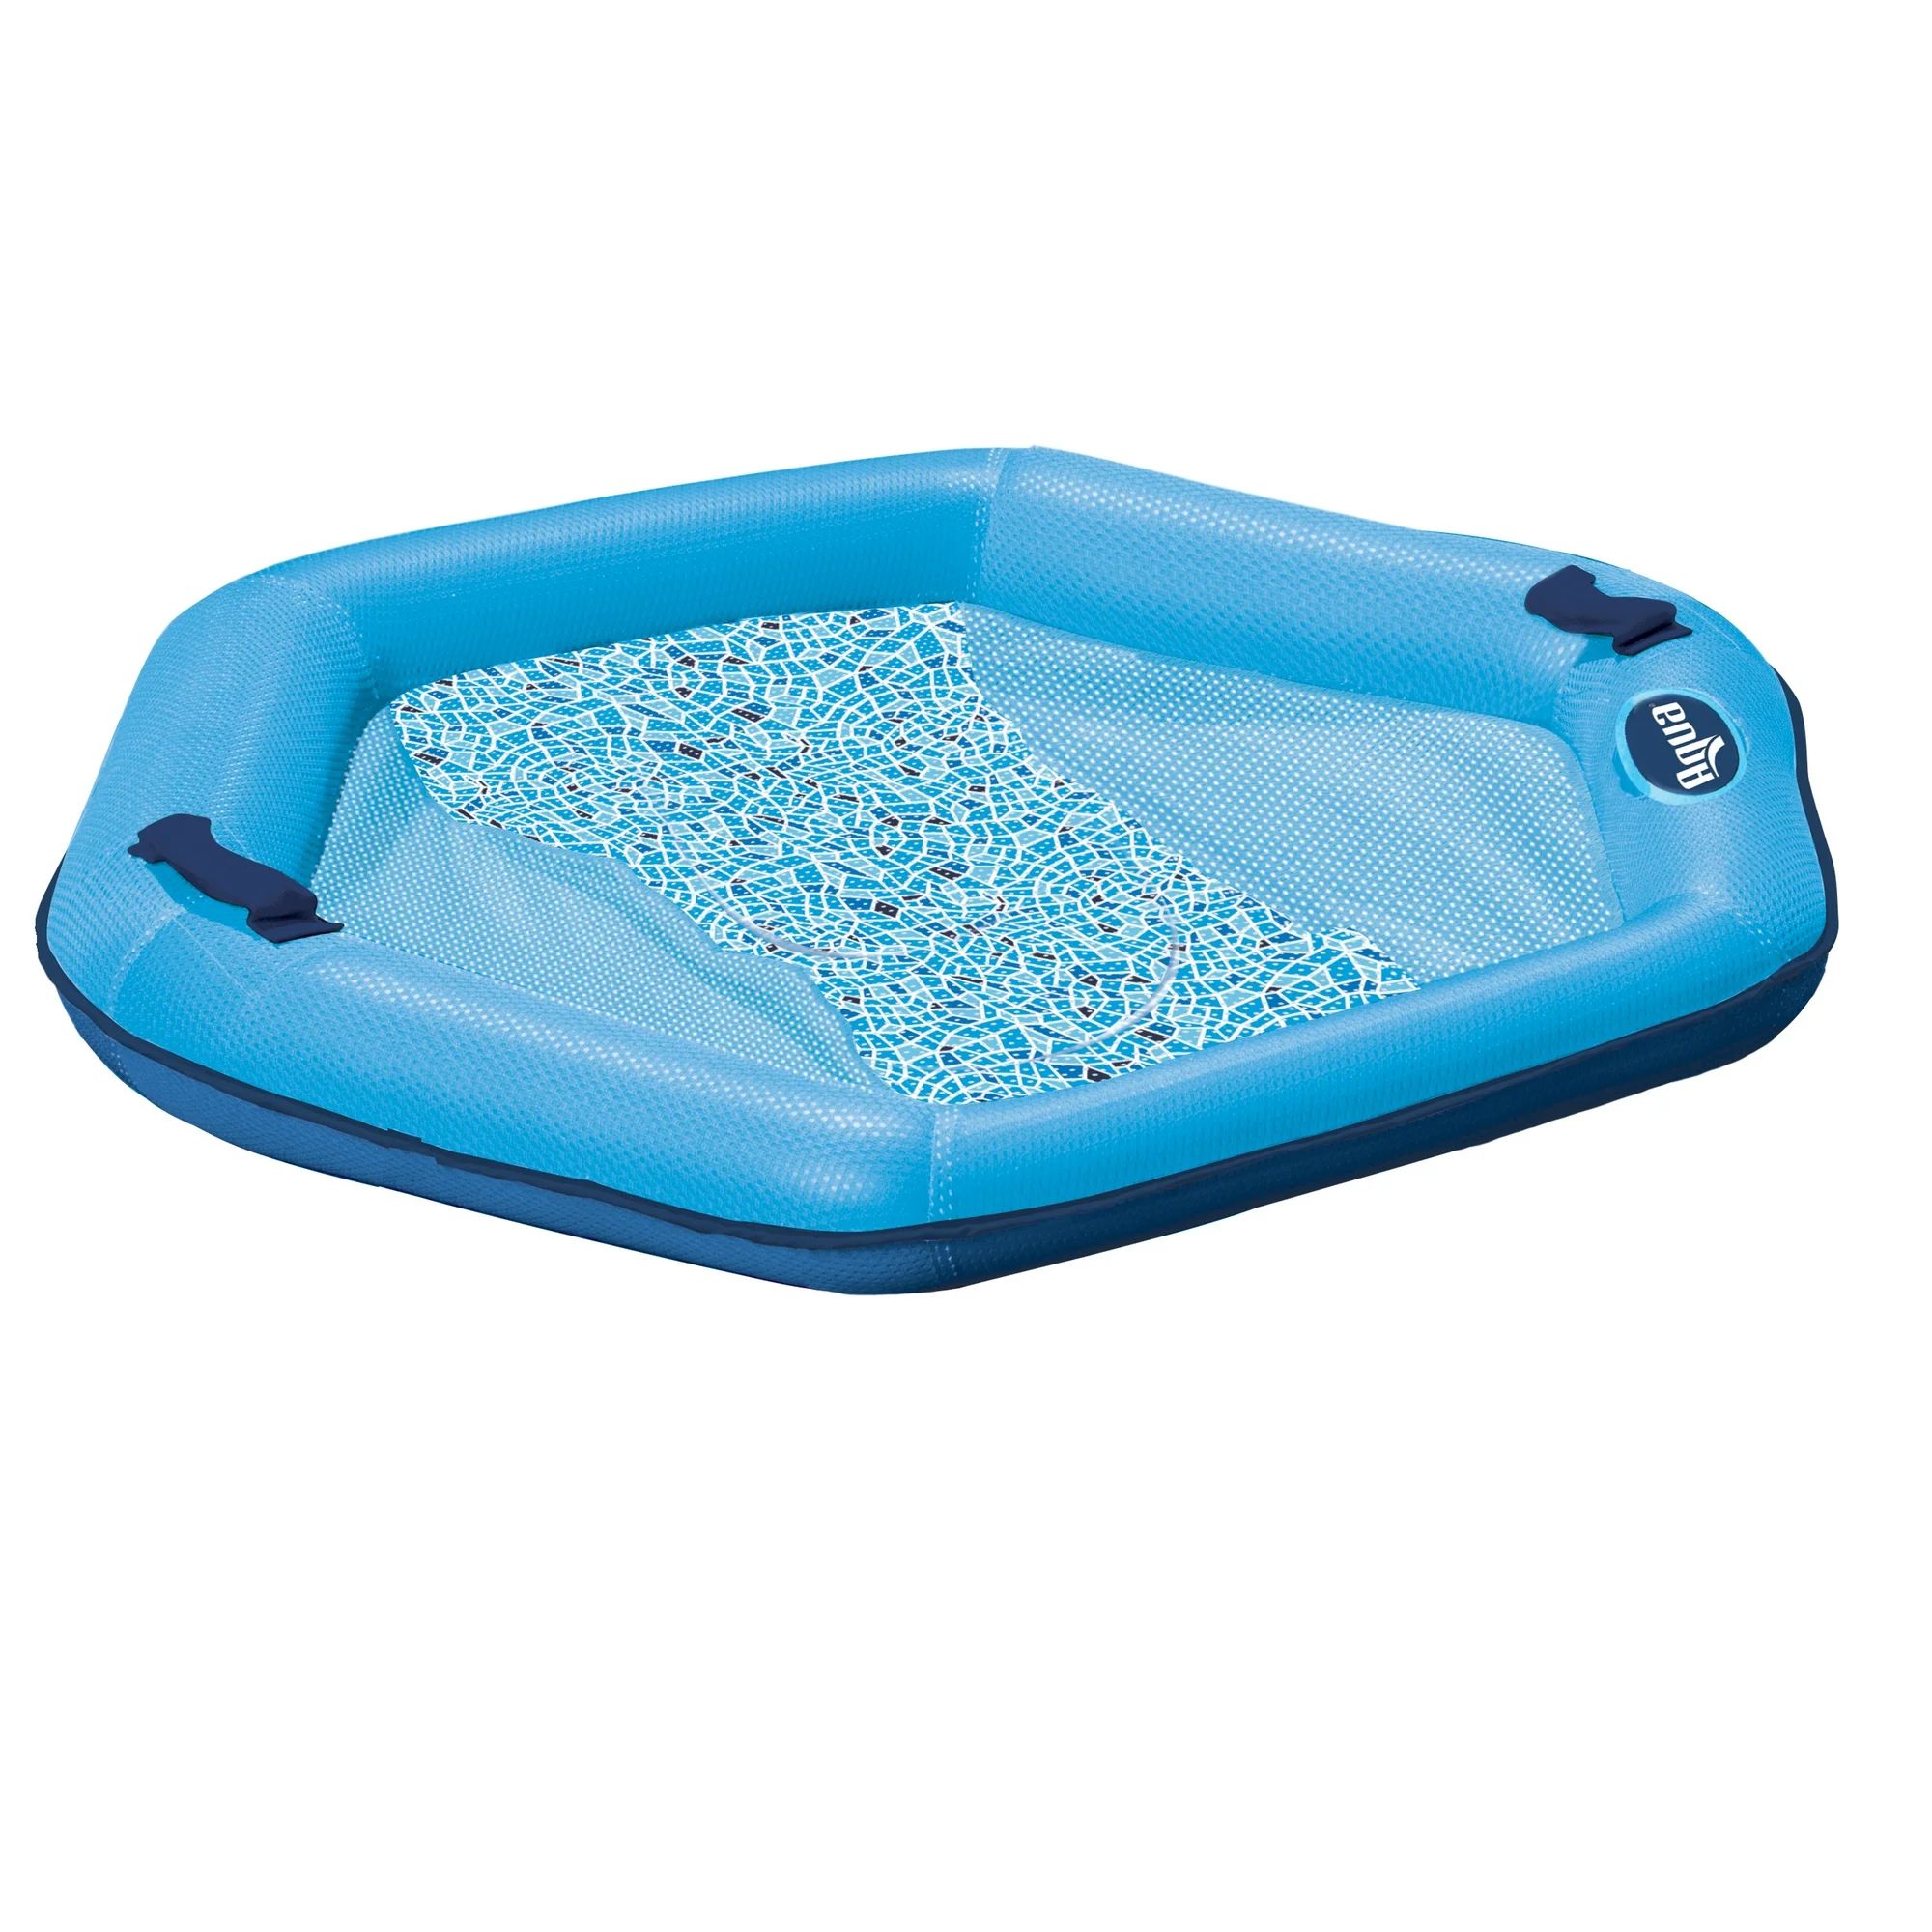 Aqua Hex Lounge Chair Pool Float for Adults, Blue, Weight Capacity 250 lbs. | Walmart (US)